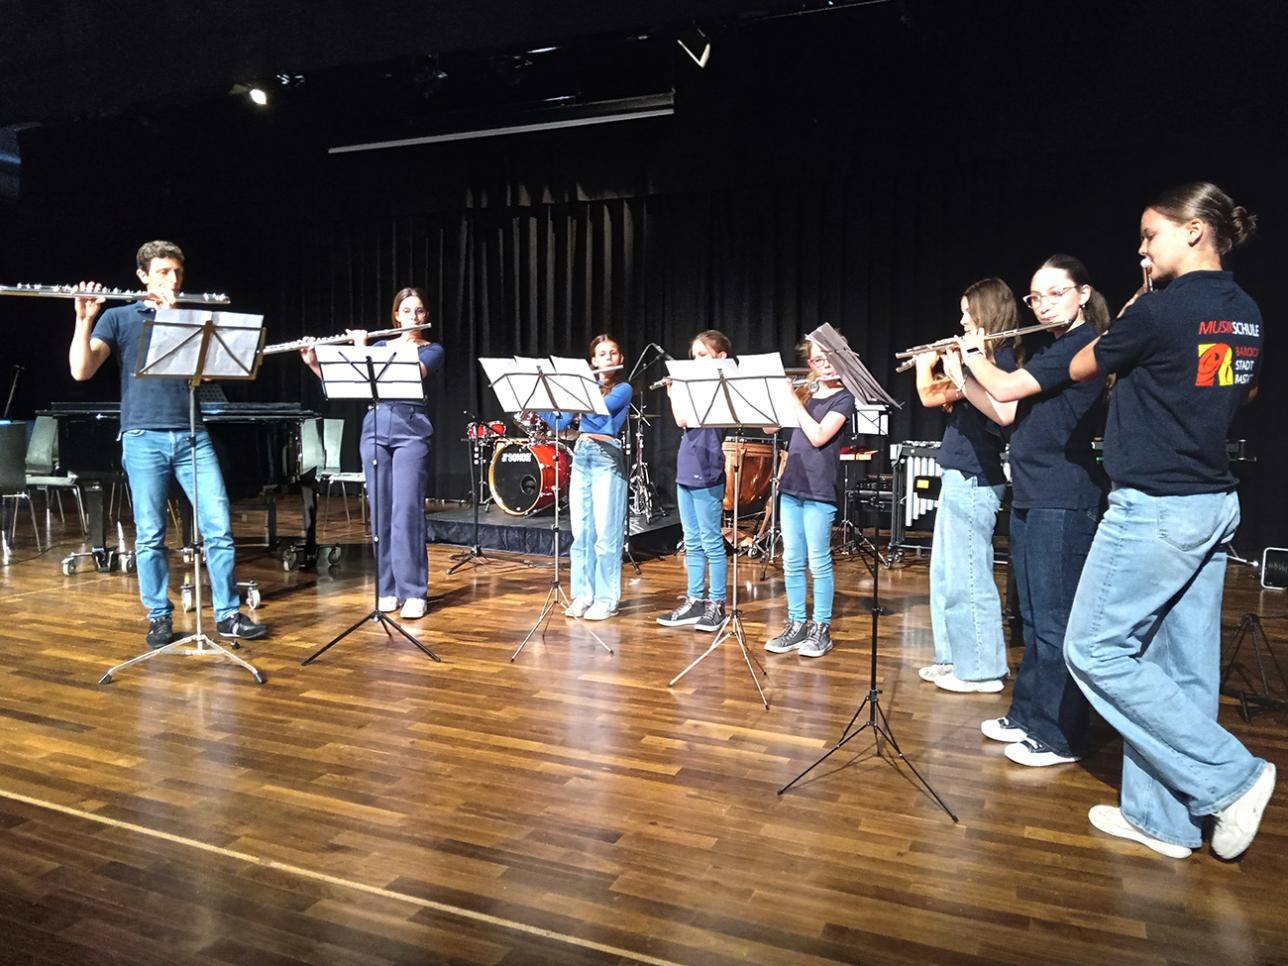 Flute players on stage at the music school's family concert